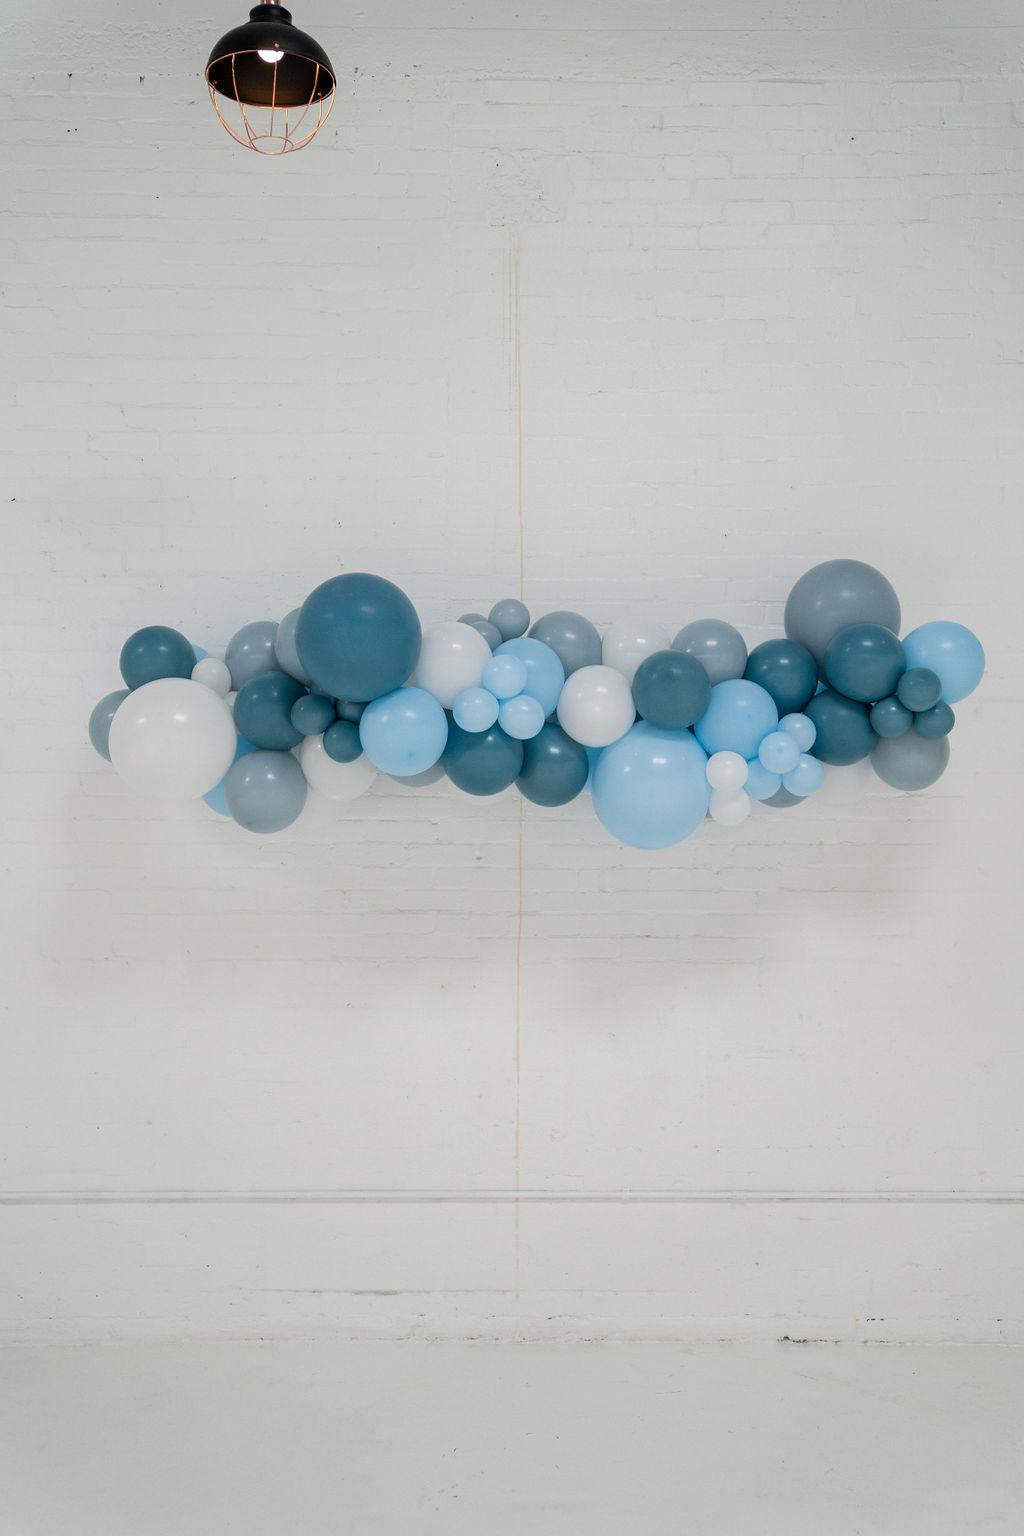 Ocean Balloon Kit-Fringe Backdrop-Party Decor-Stellar Creations-Oh My Darling Party Co-baby blue, balloon arch, balloon garland, balloon garlands, balloon kit, balloon swag, balloons, beach, Beach Life Is The Best Life, birthday decorations, Birthday Party, blue, BLUE BACKDROP, BLUE BACKDROPS, blue party, boat, boating, boats, dusty blue, Fishing, gone fishing, happy birthday, light blue, ocean, pastel blue, sea, seashells, Seaside, seaside bachelorette, under the sea